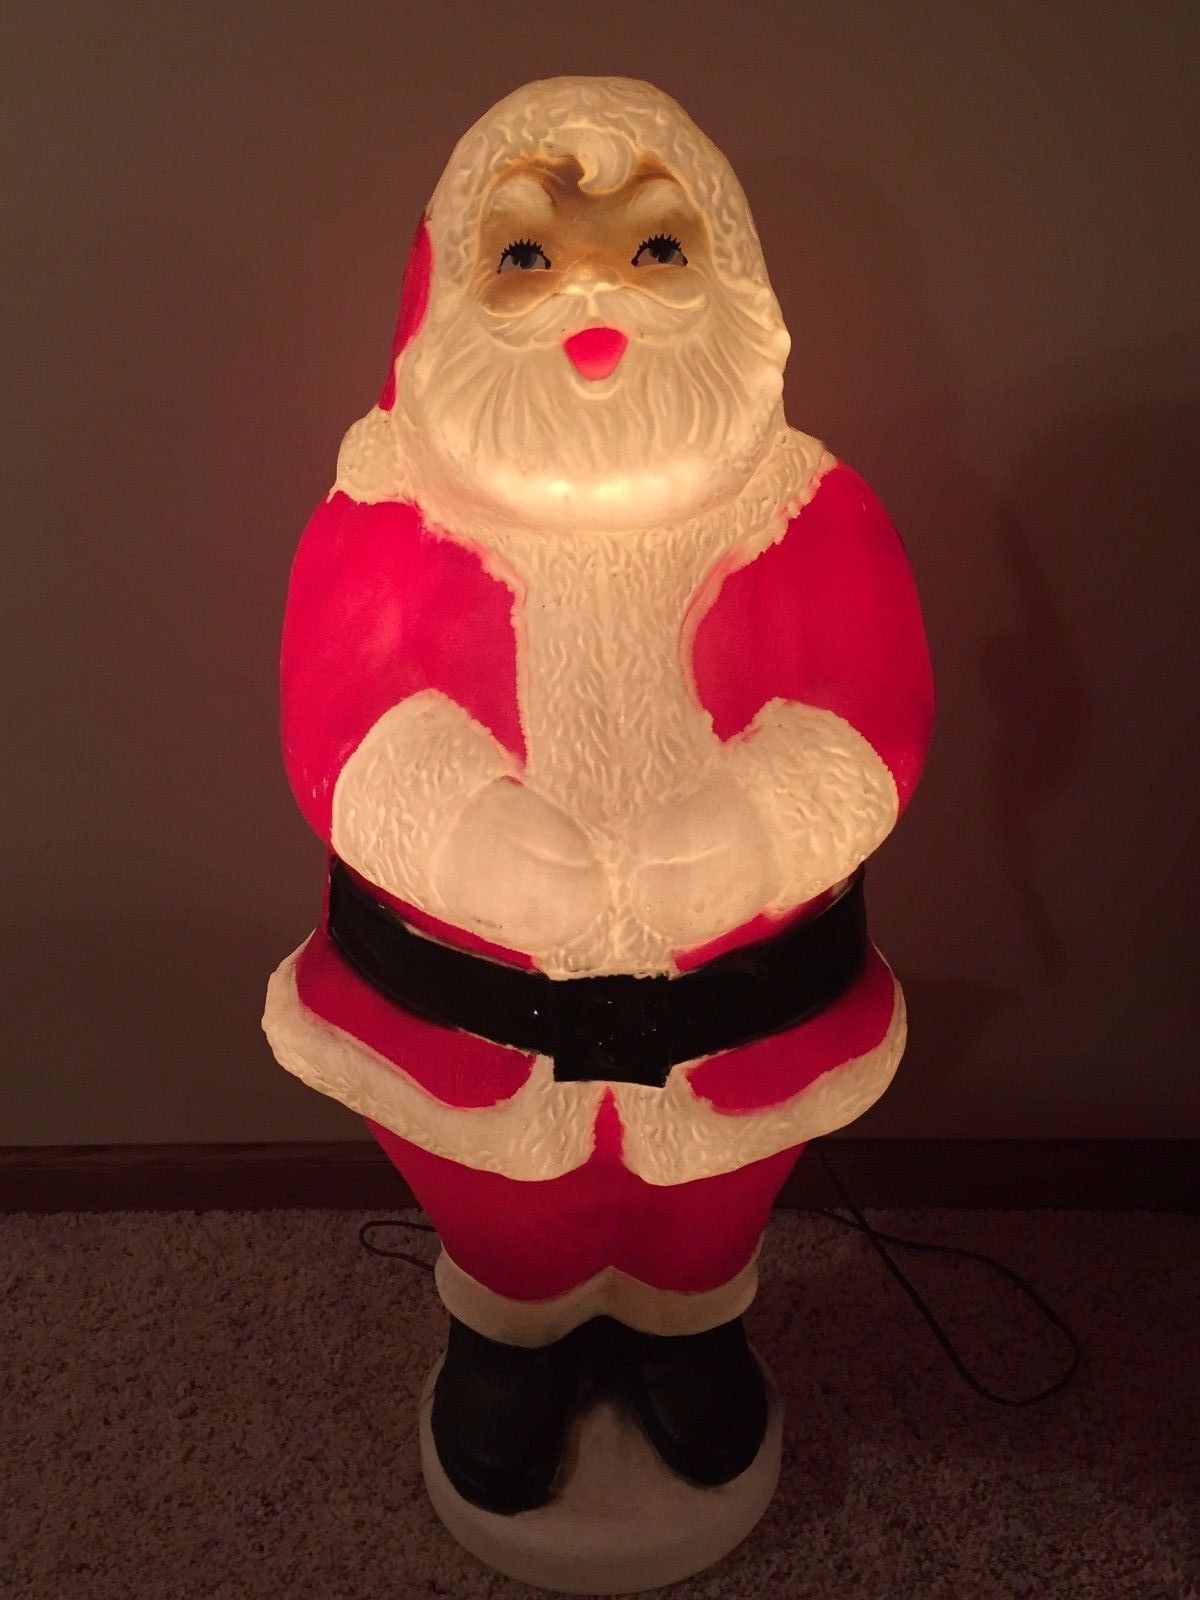  Blow Mold Christmas Yard Decorations for Living room